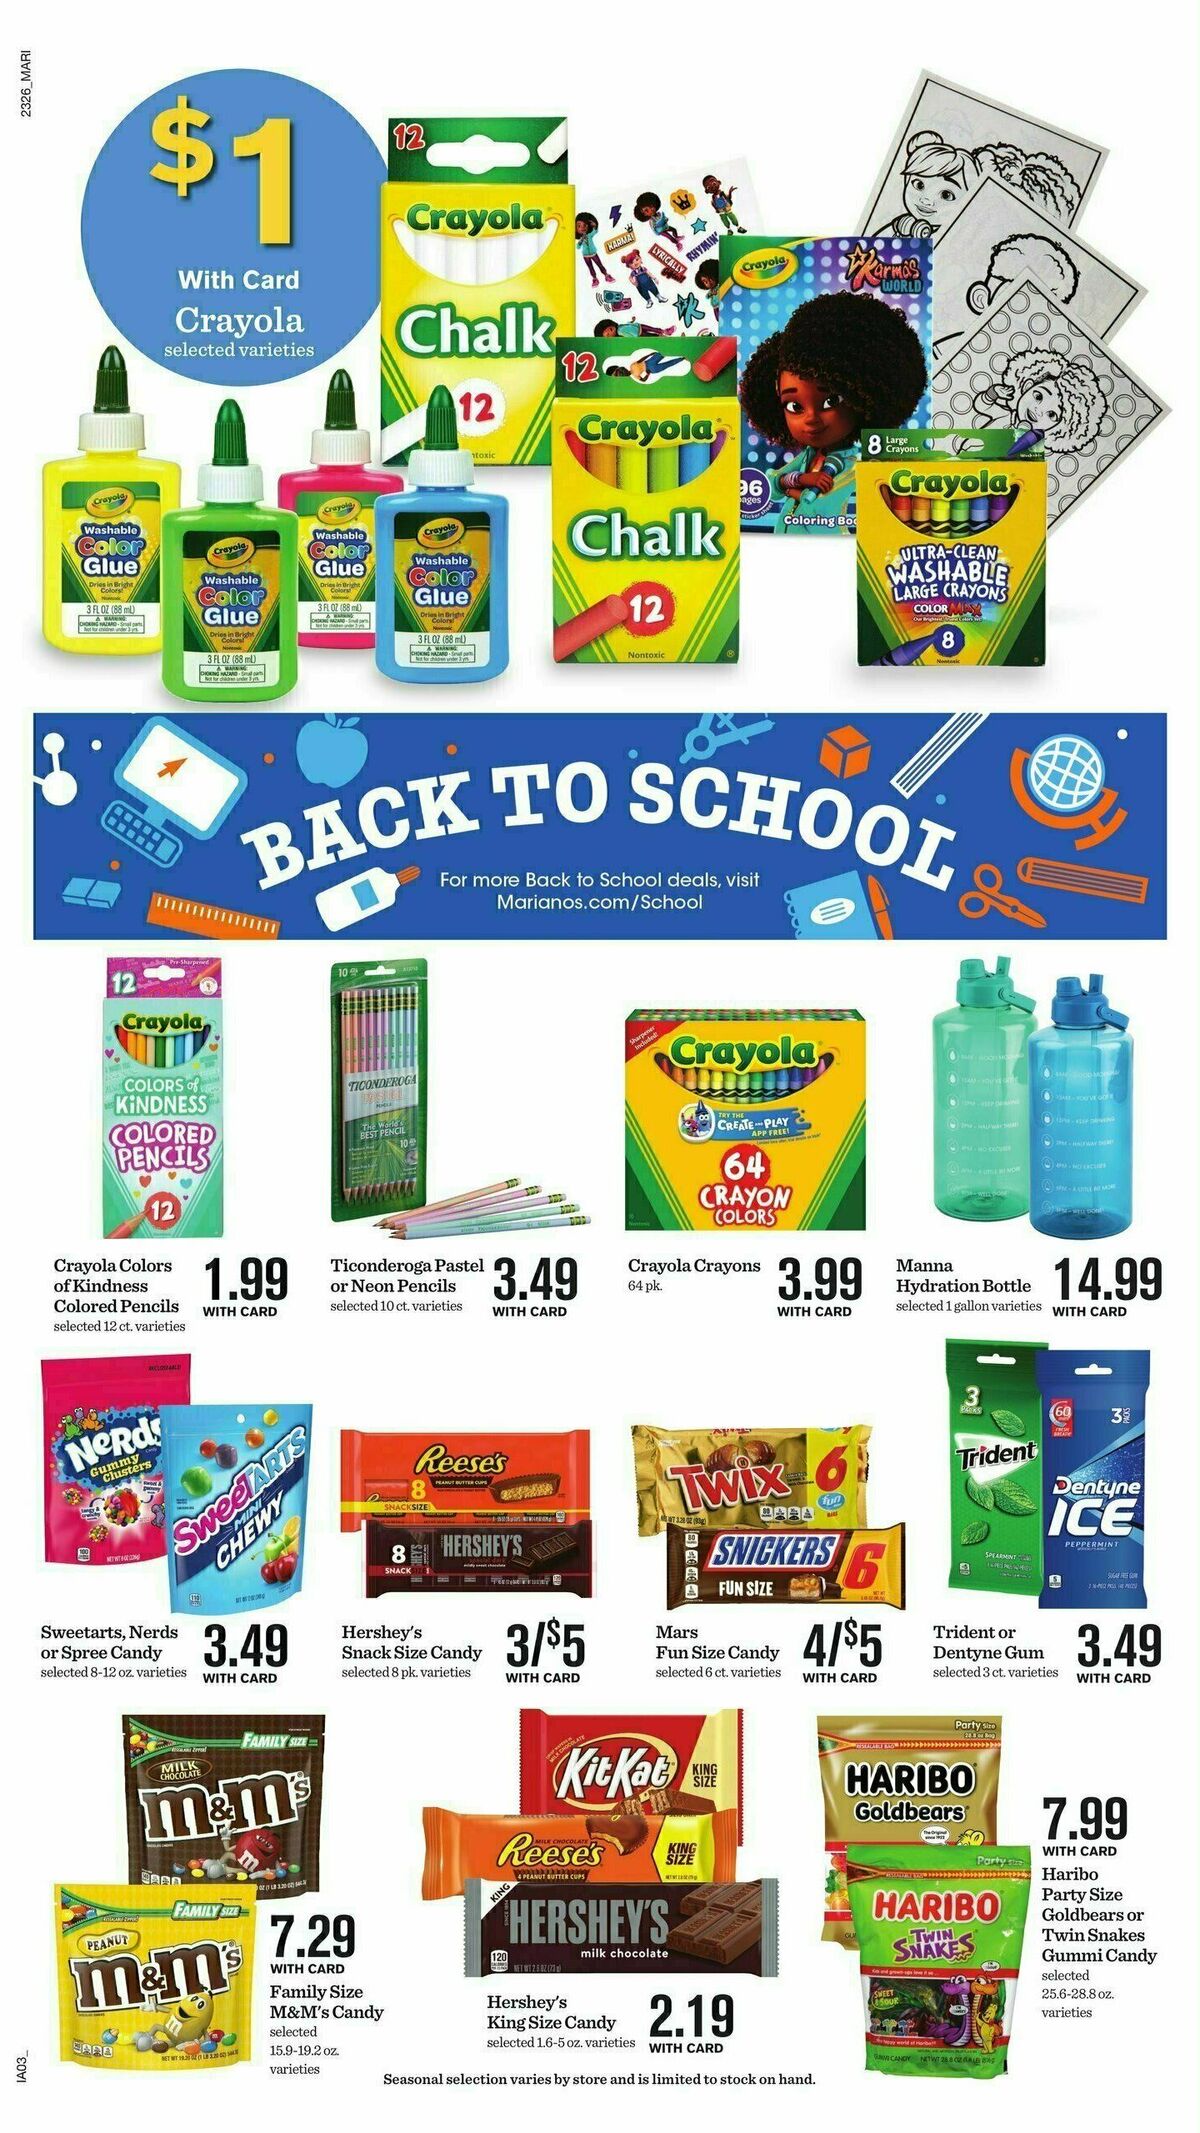 Mariano's Weekly Ad from July 26